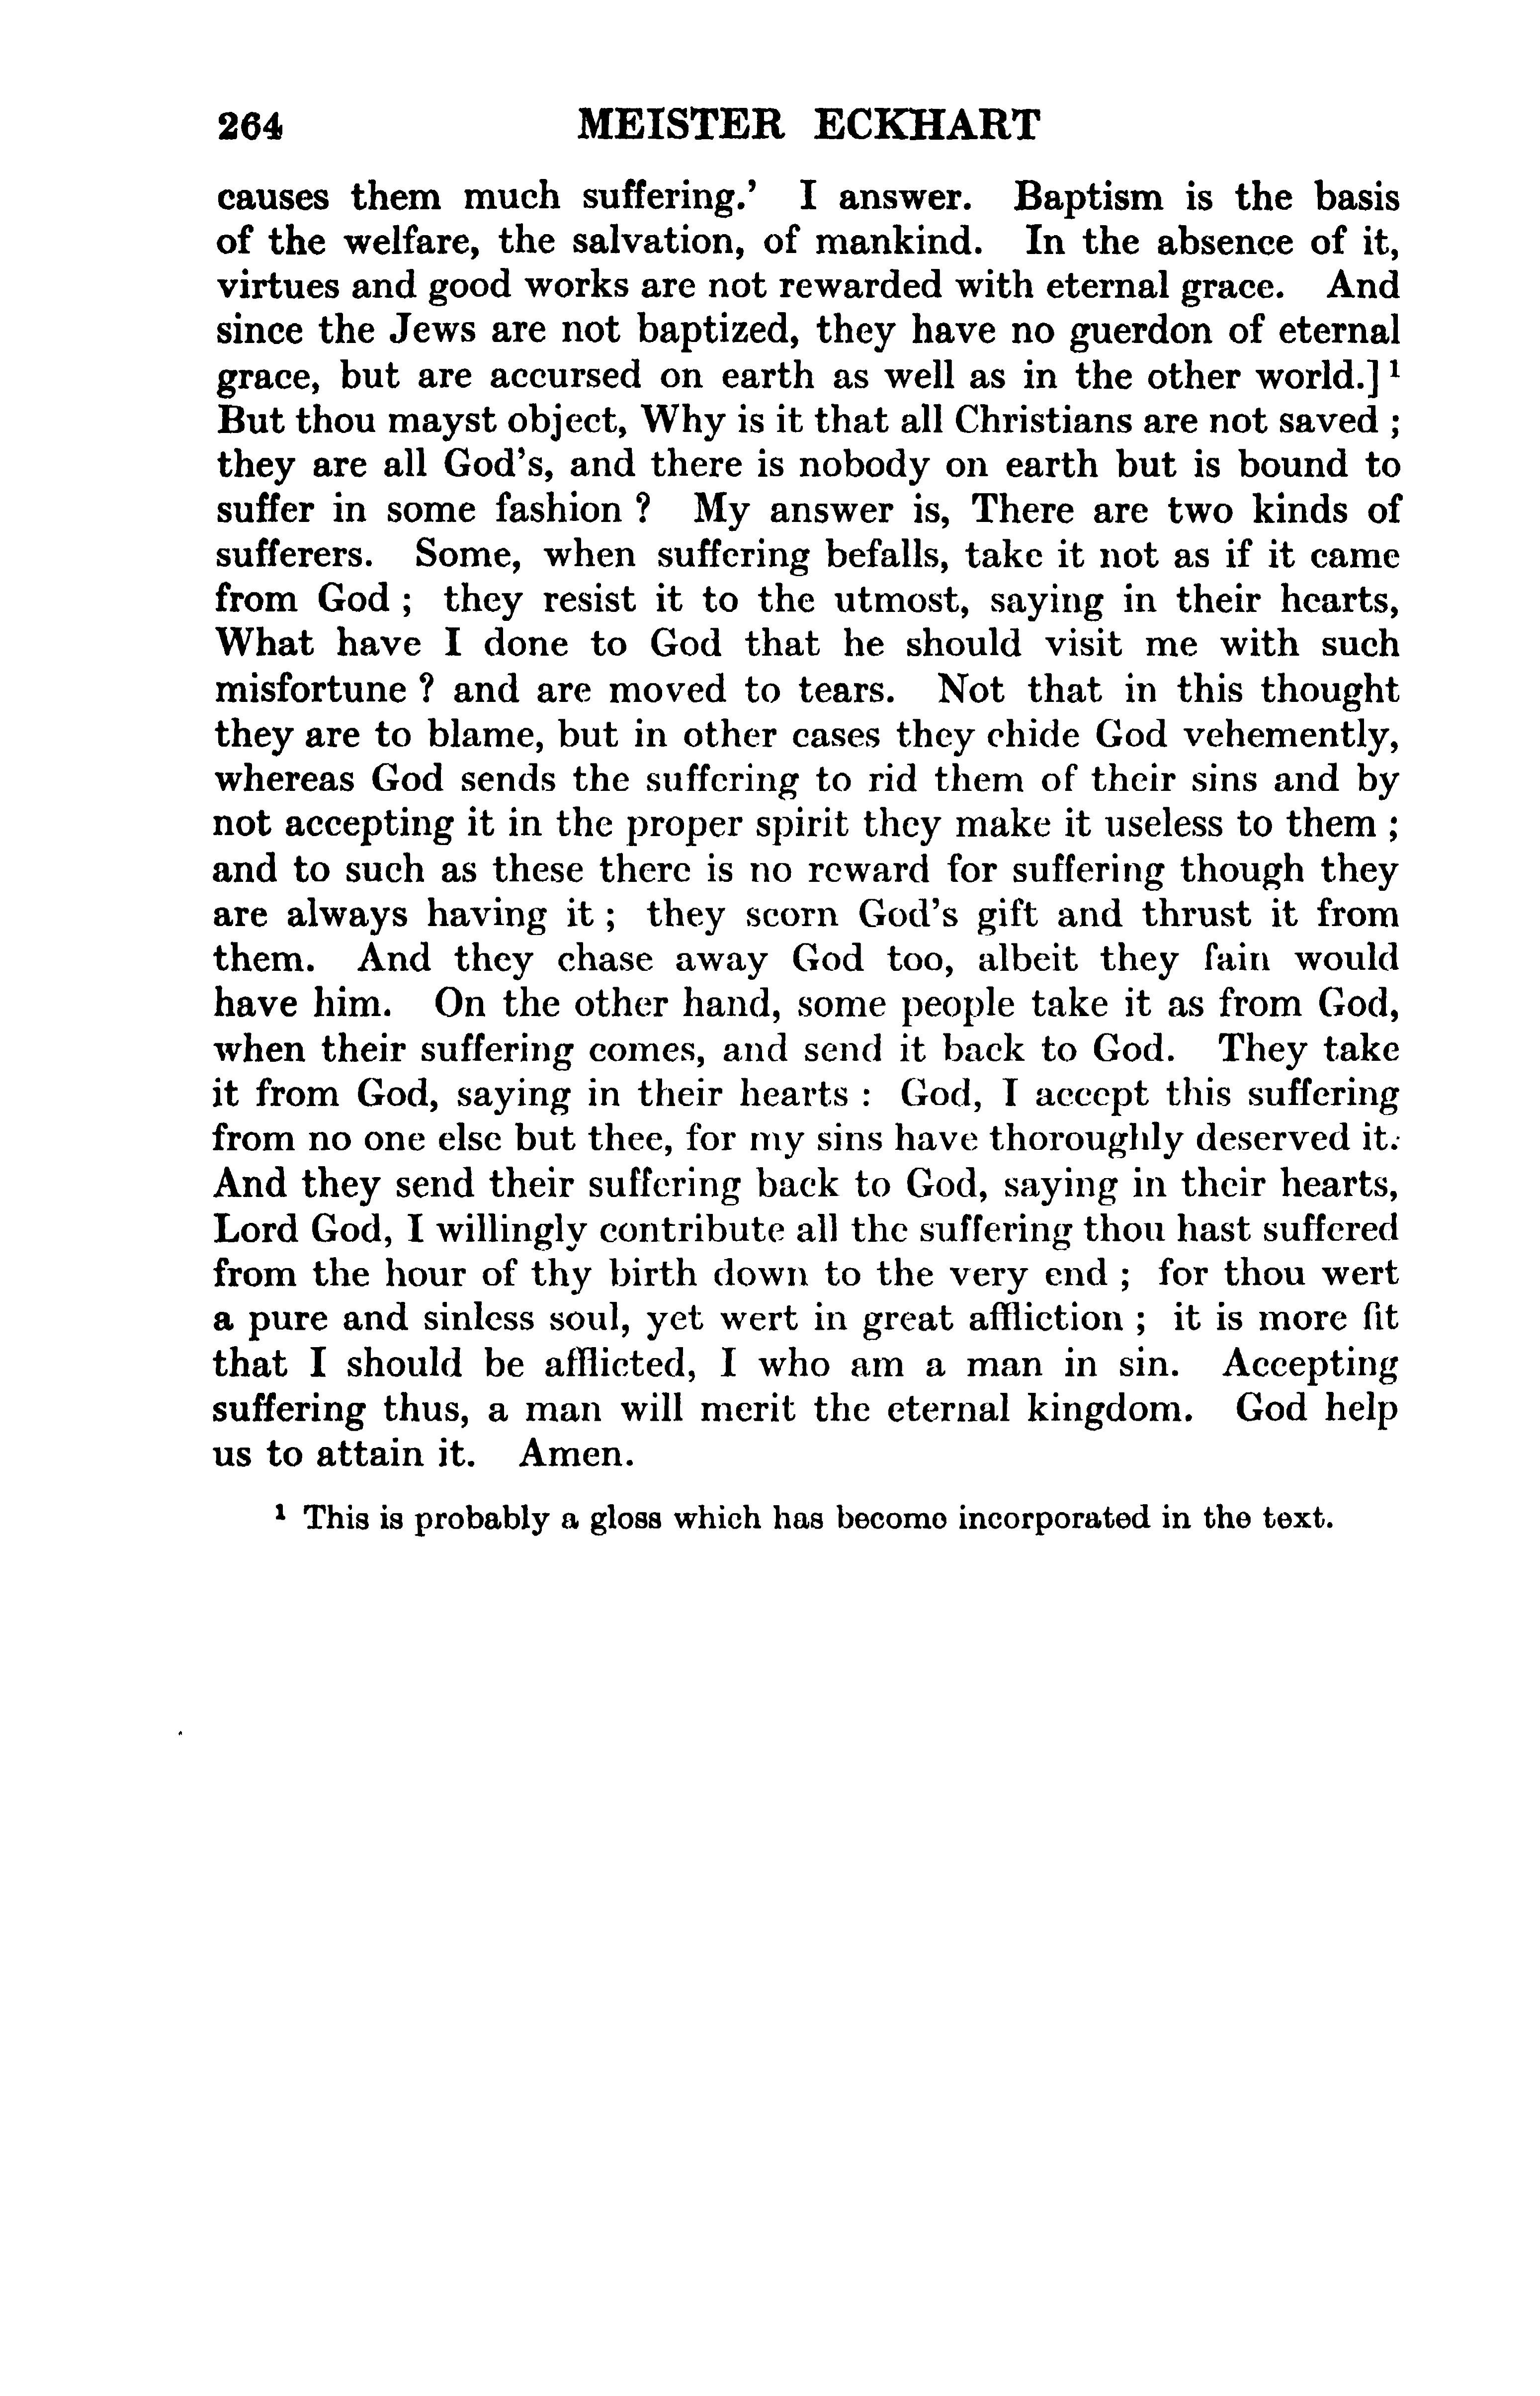 Image of page 0288